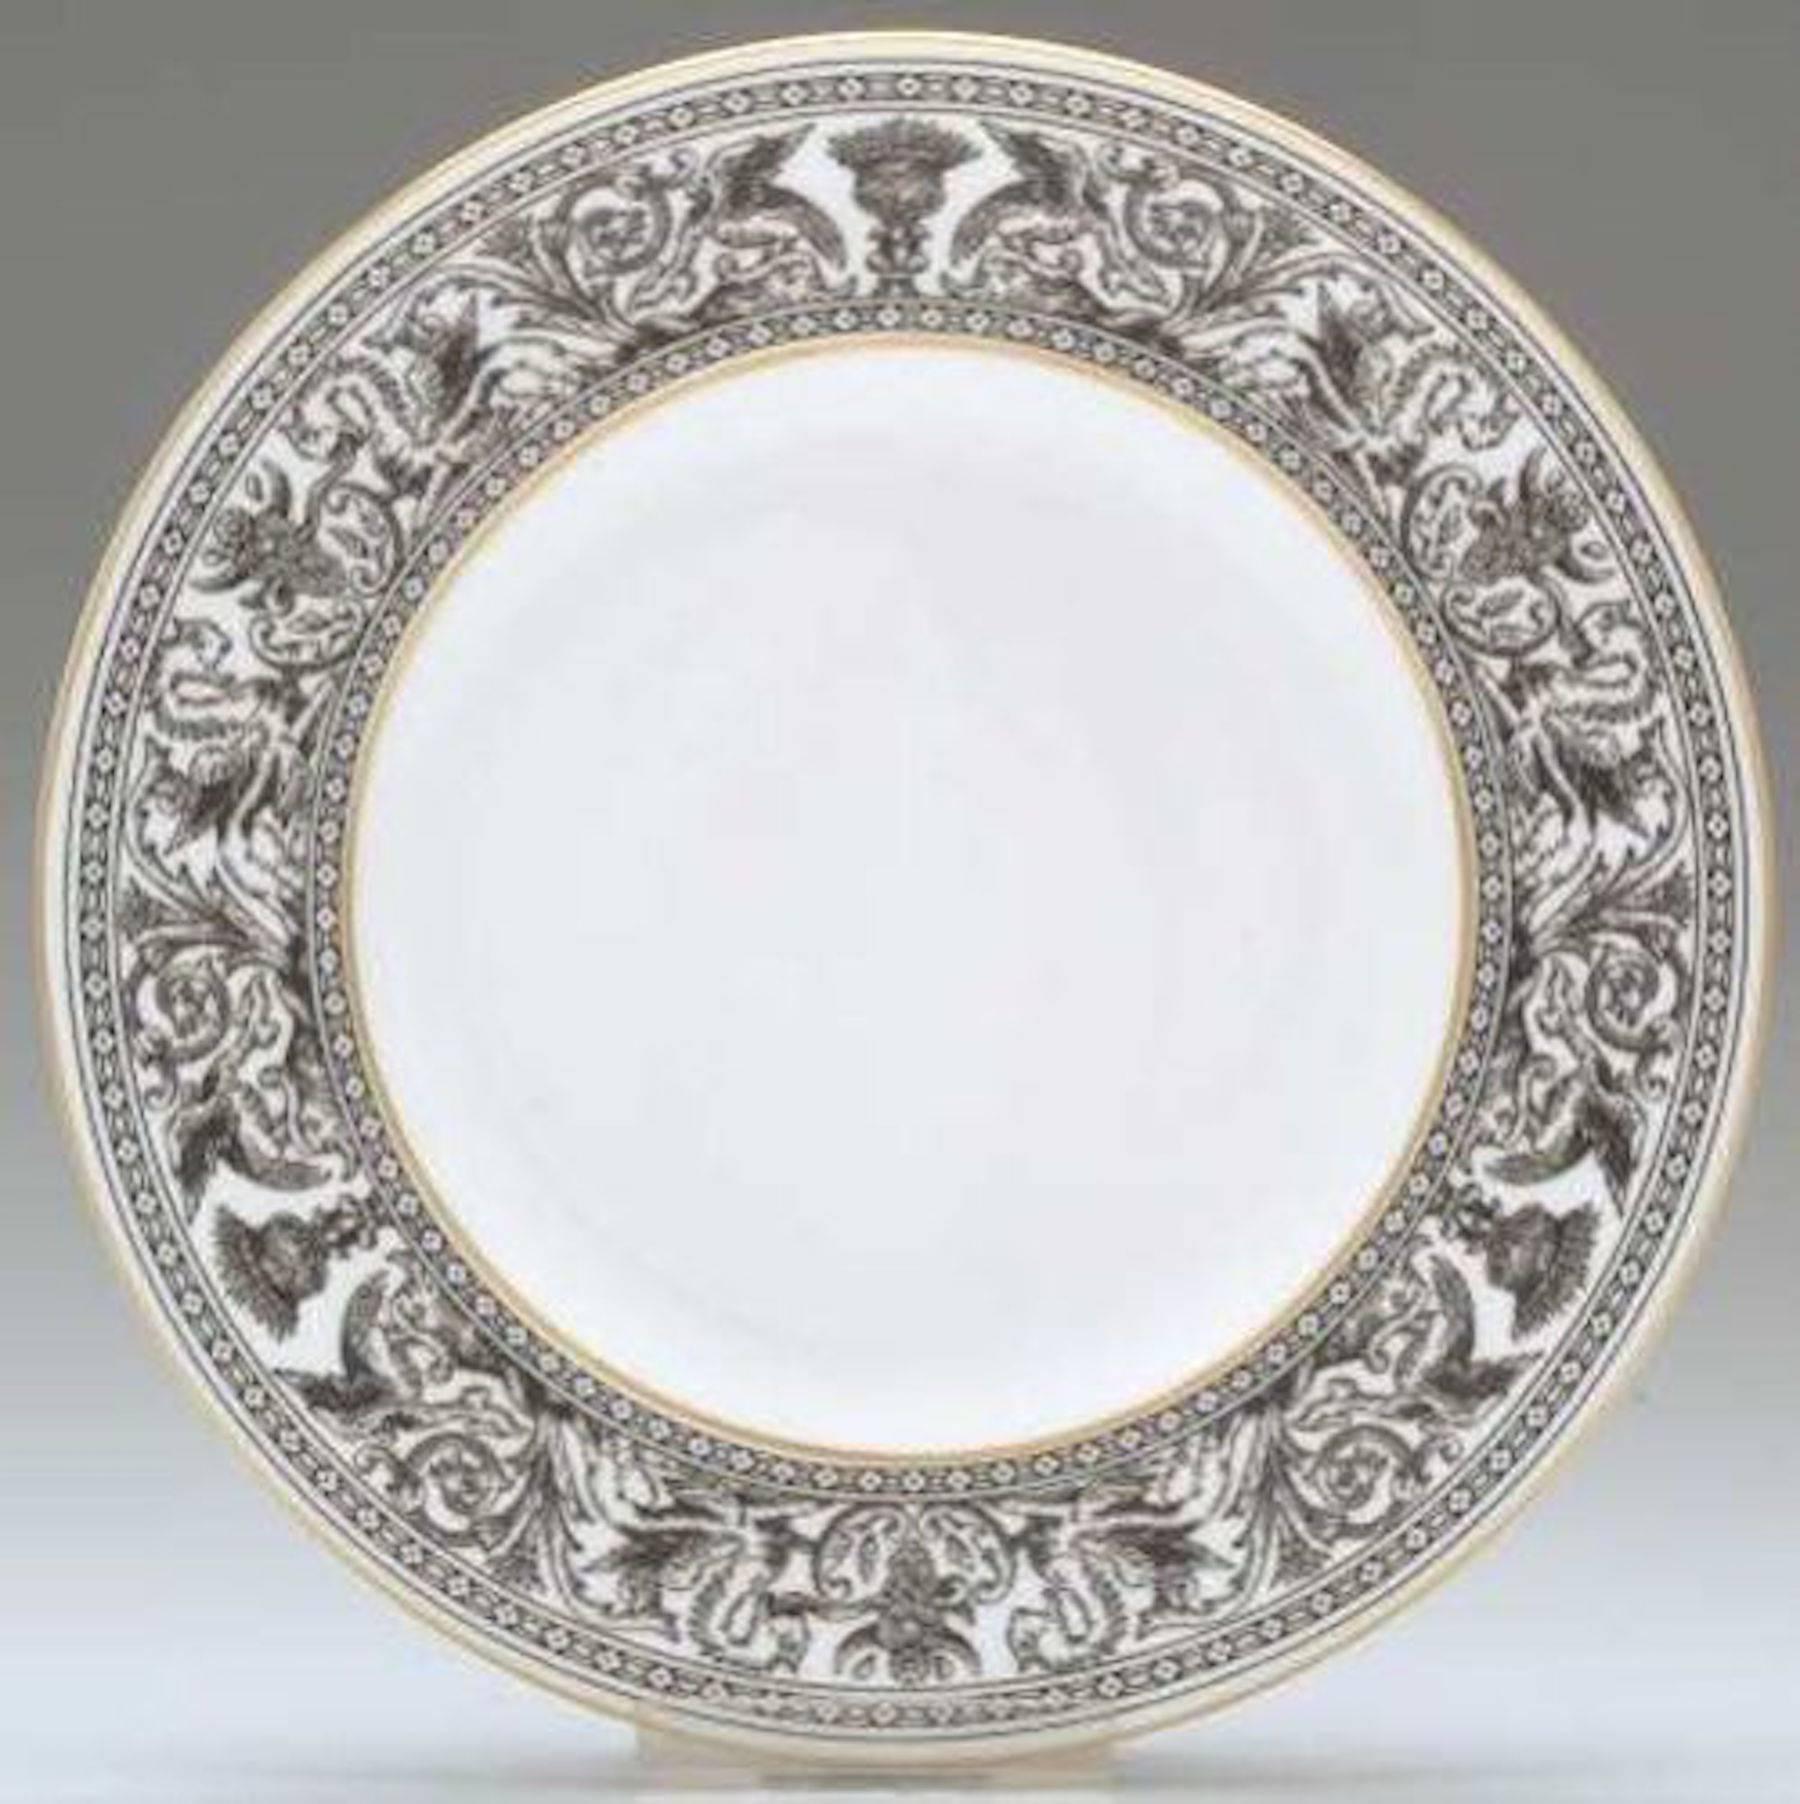 Wedgwood service for 12, 